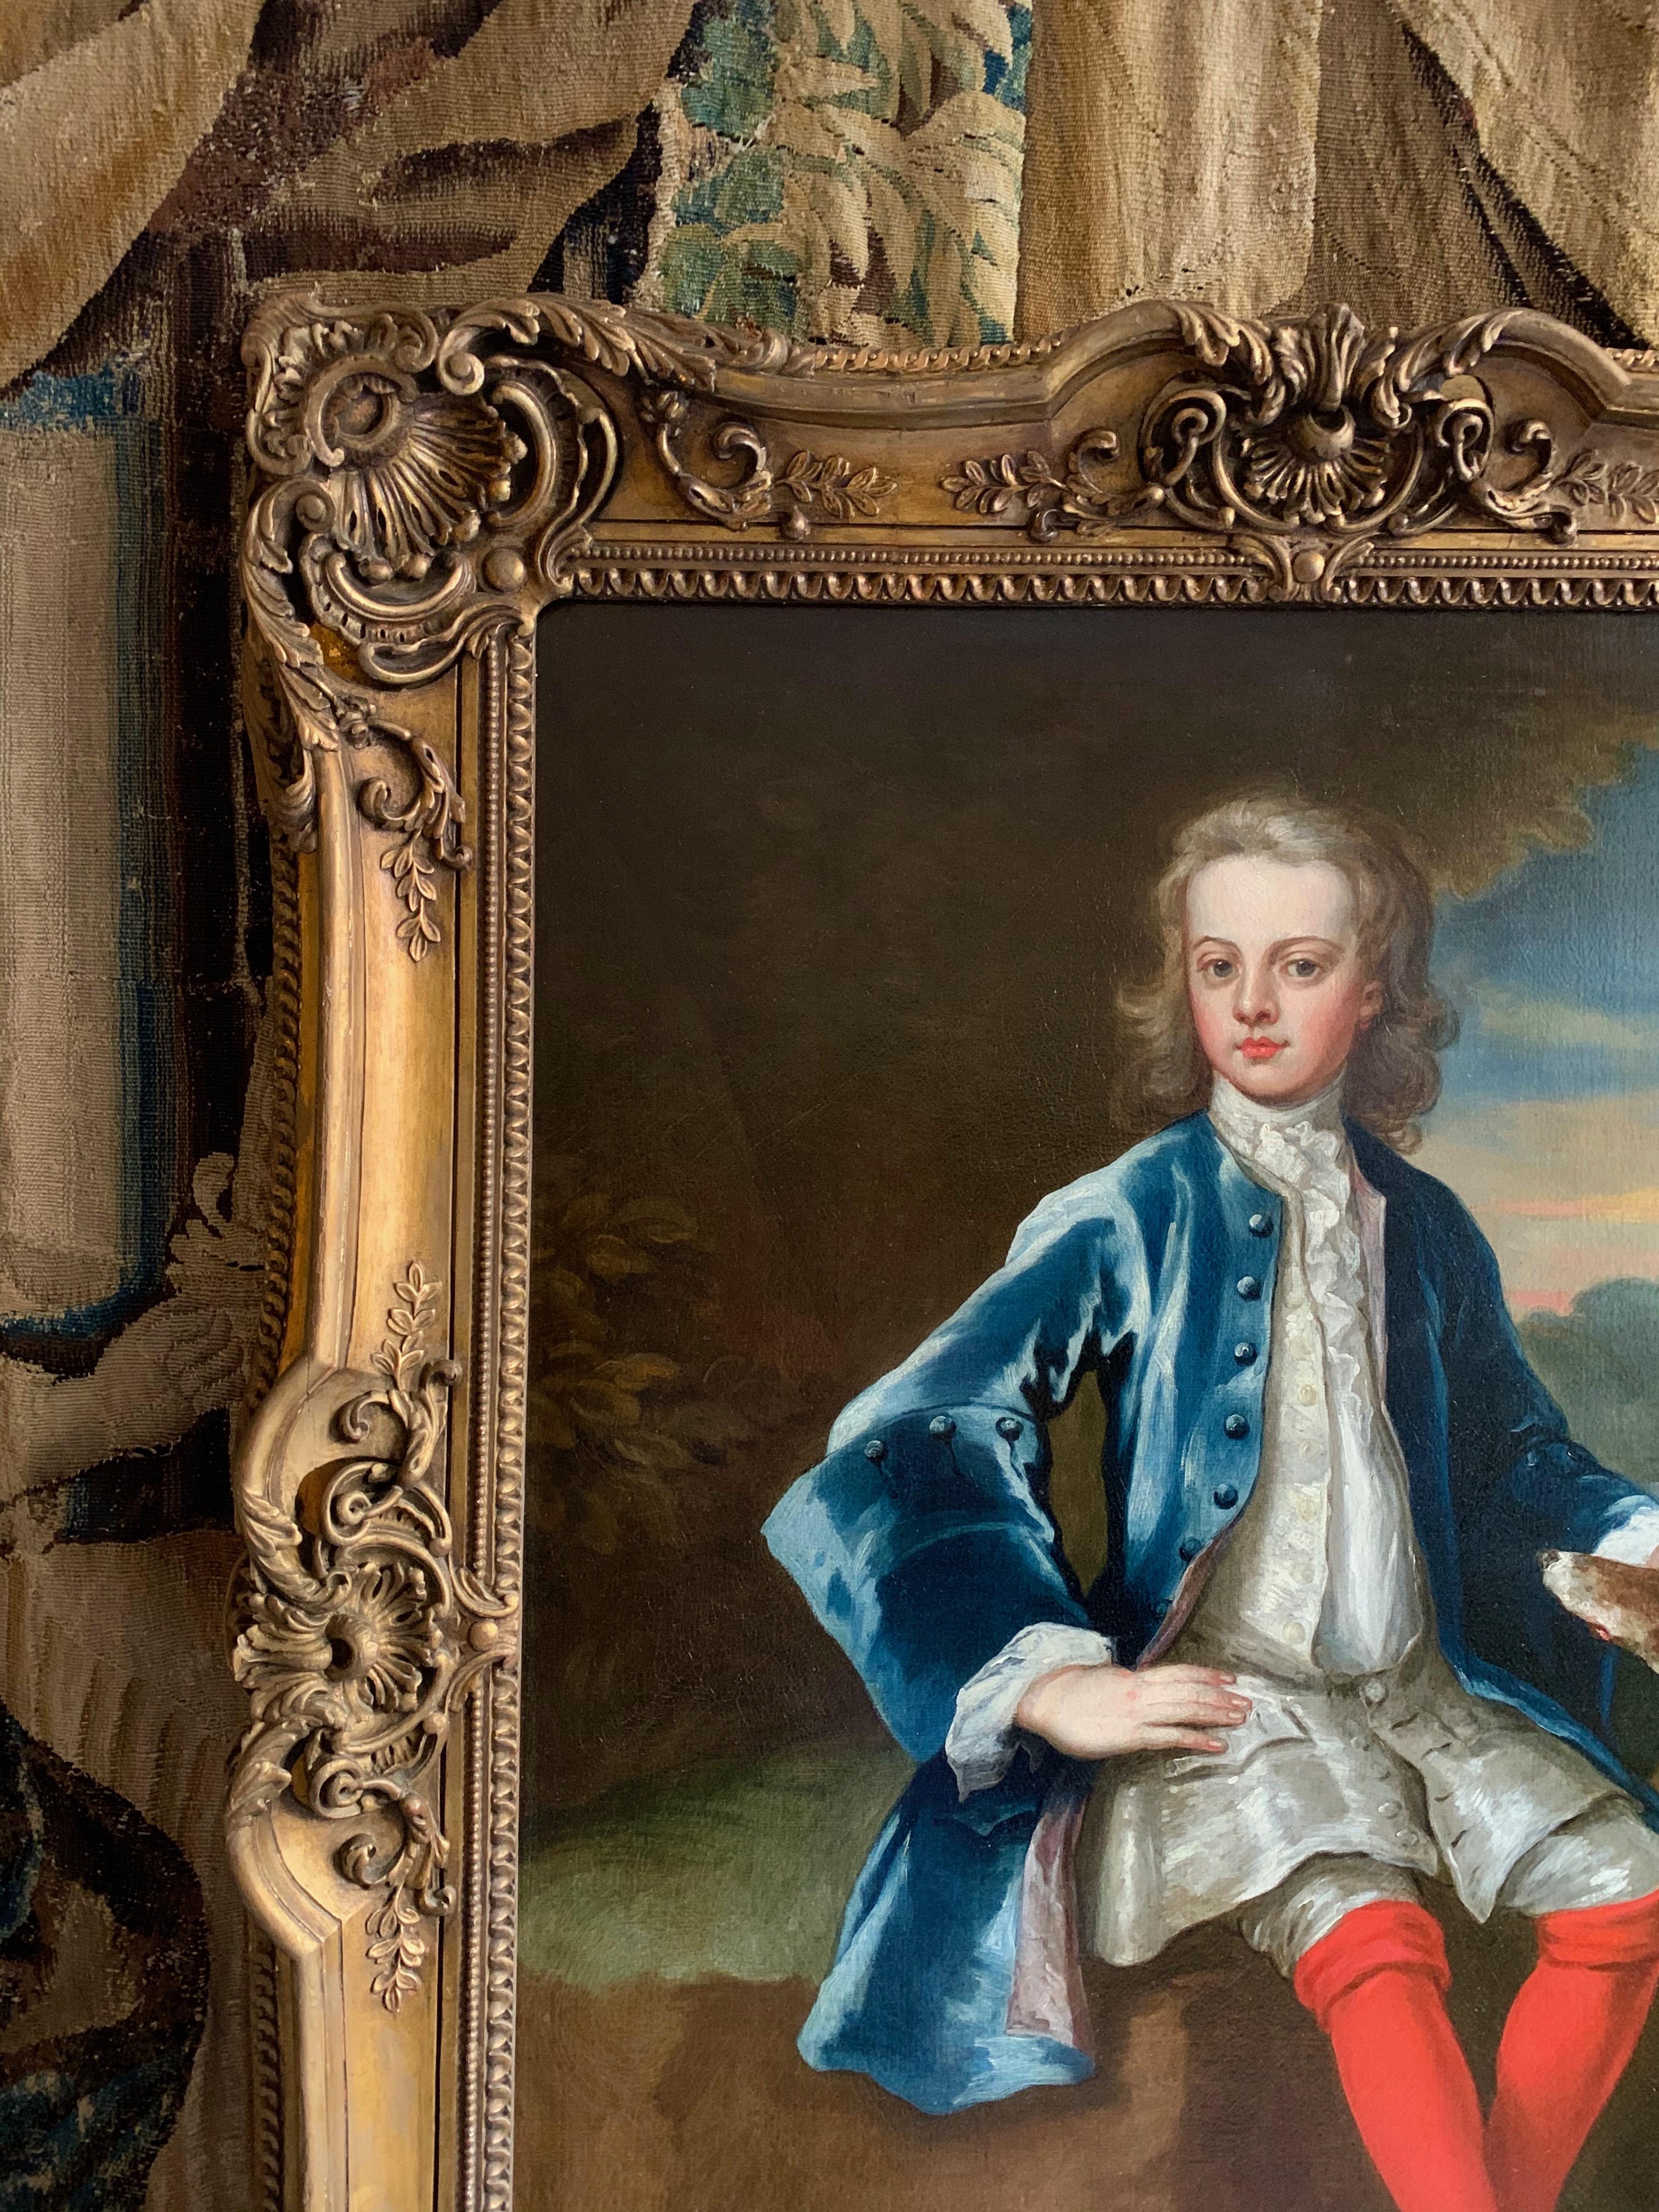 18th Century English Portrait of a Gentleman in a Blue Coat with his Dog - Old Masters Painting by John Vanderbank